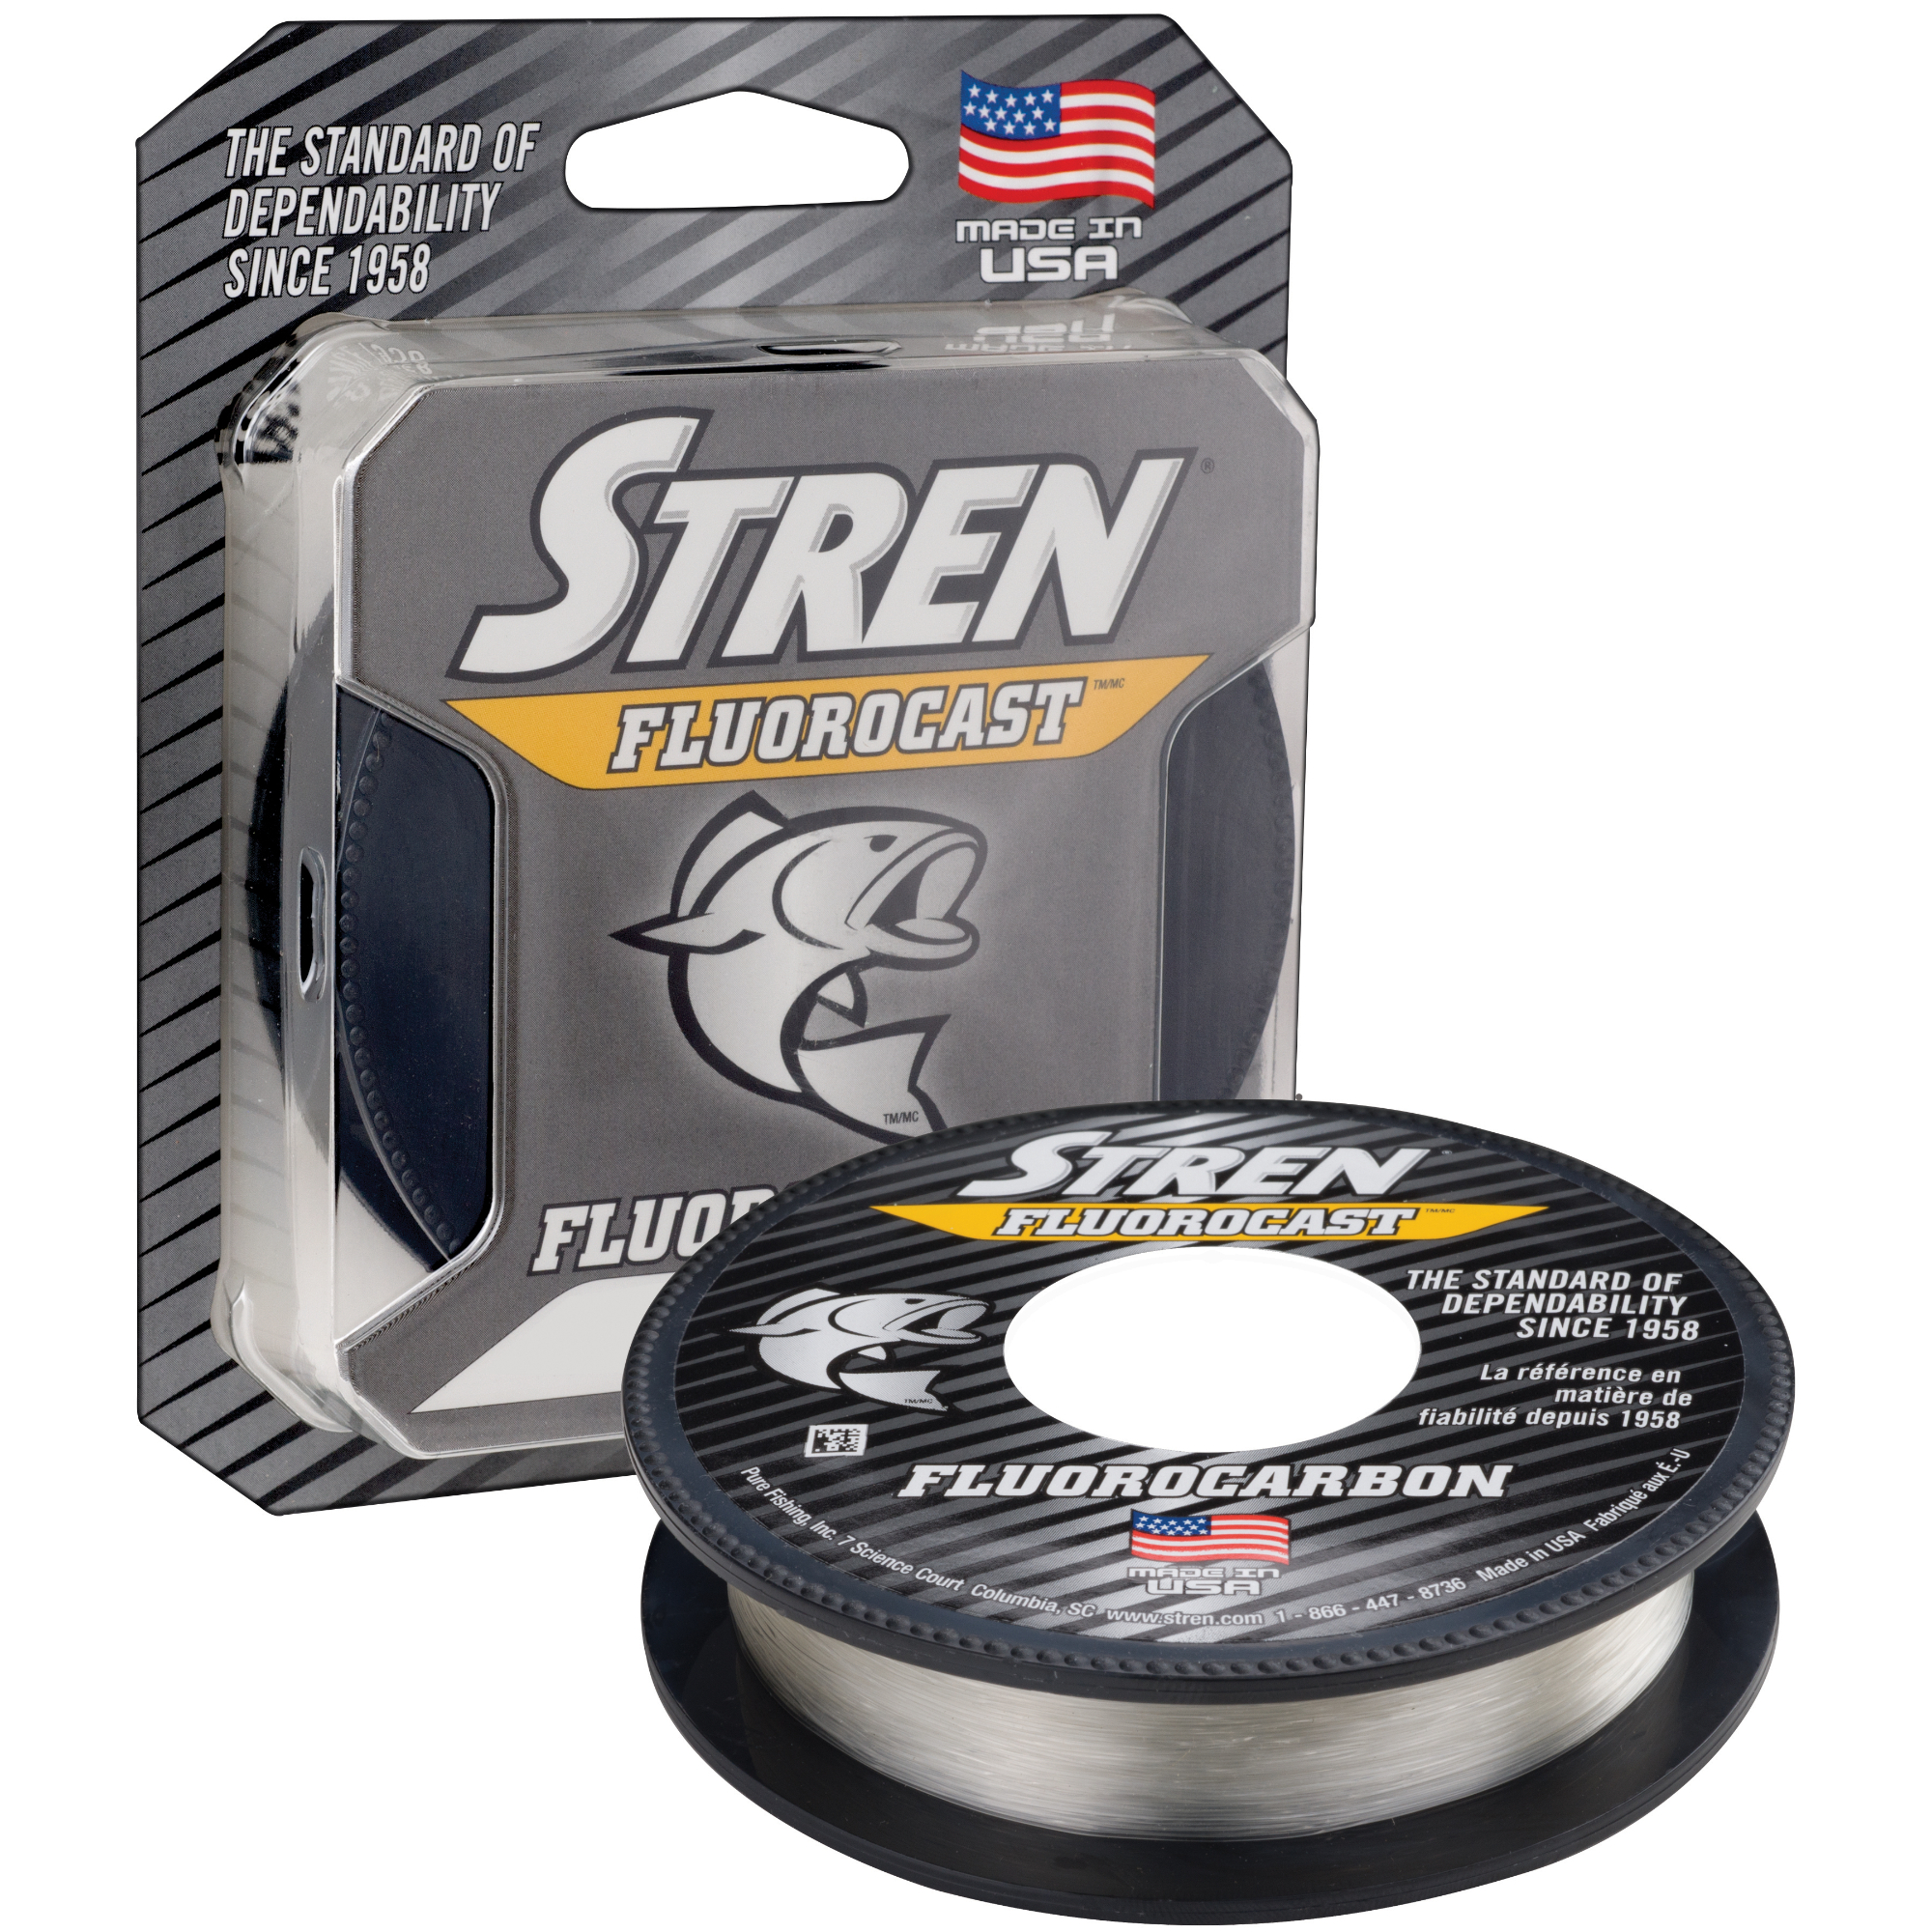 Stren Fluorocast Fishing Line 4 lbs. Clear - 200 Yds - Precision